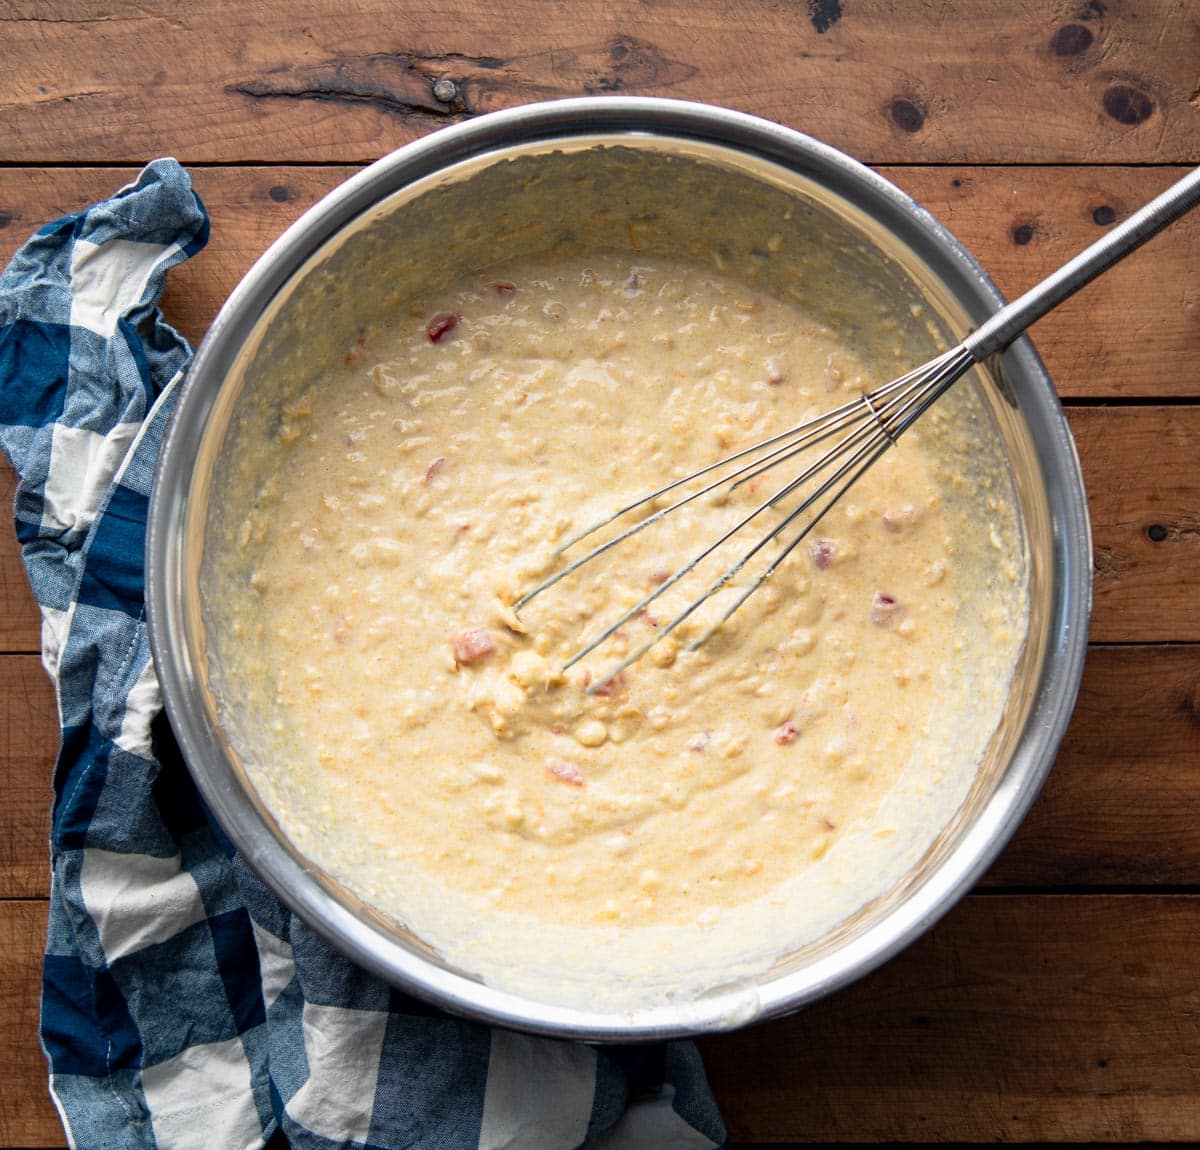 Whisking together Jiffy corn bread batter with creamed corn and cheese.